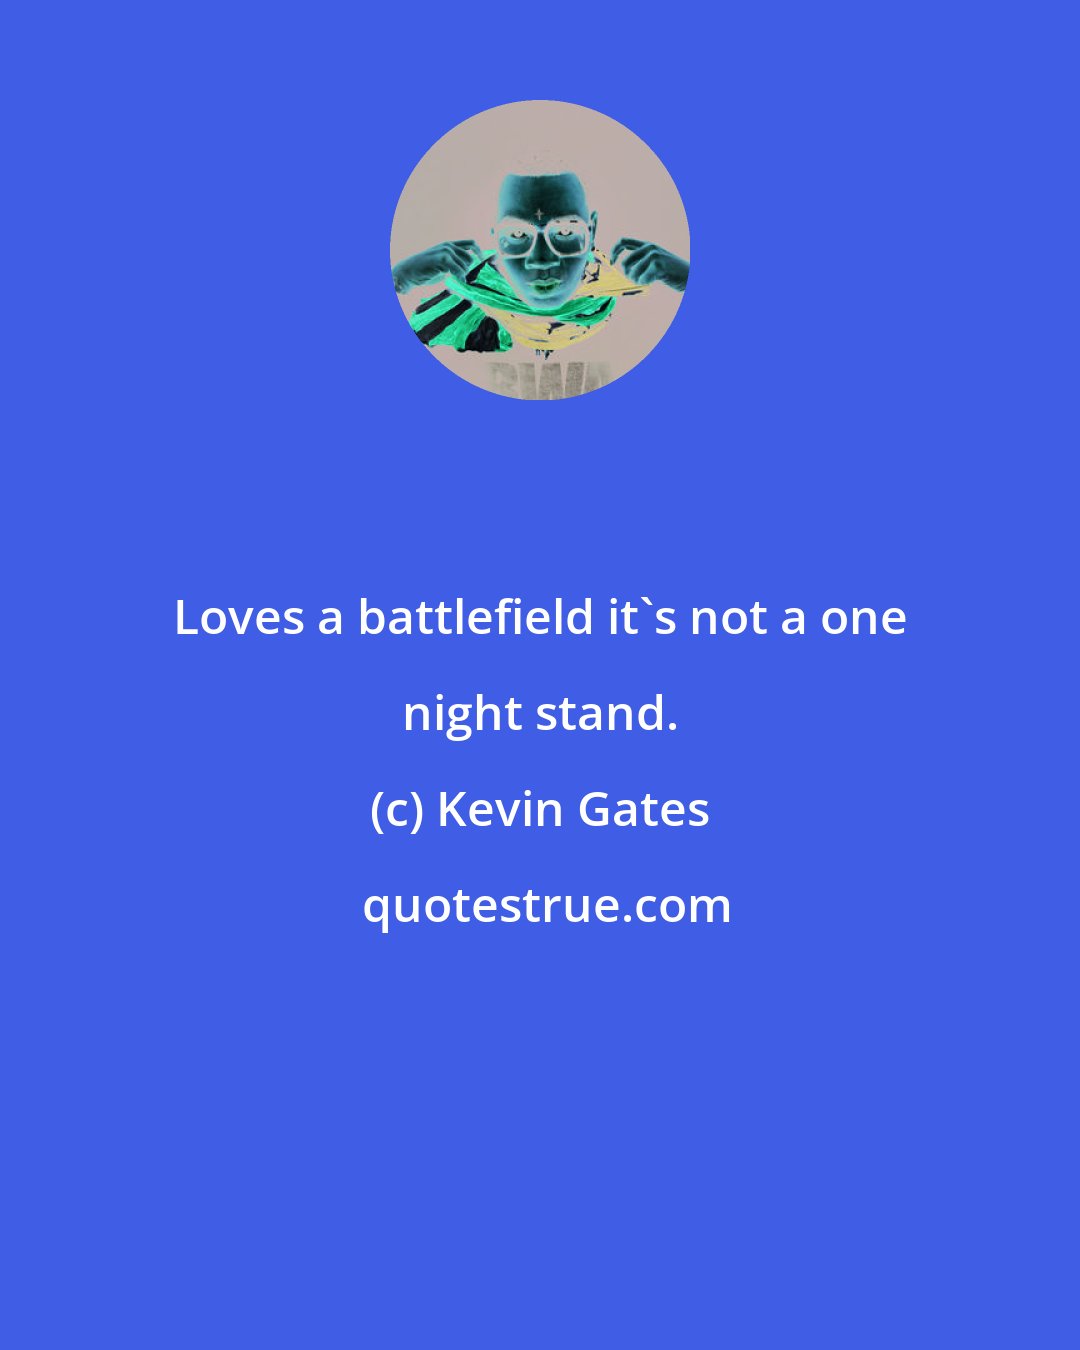 Kevin Gates: Loves a battlefield it's not a one night stand.